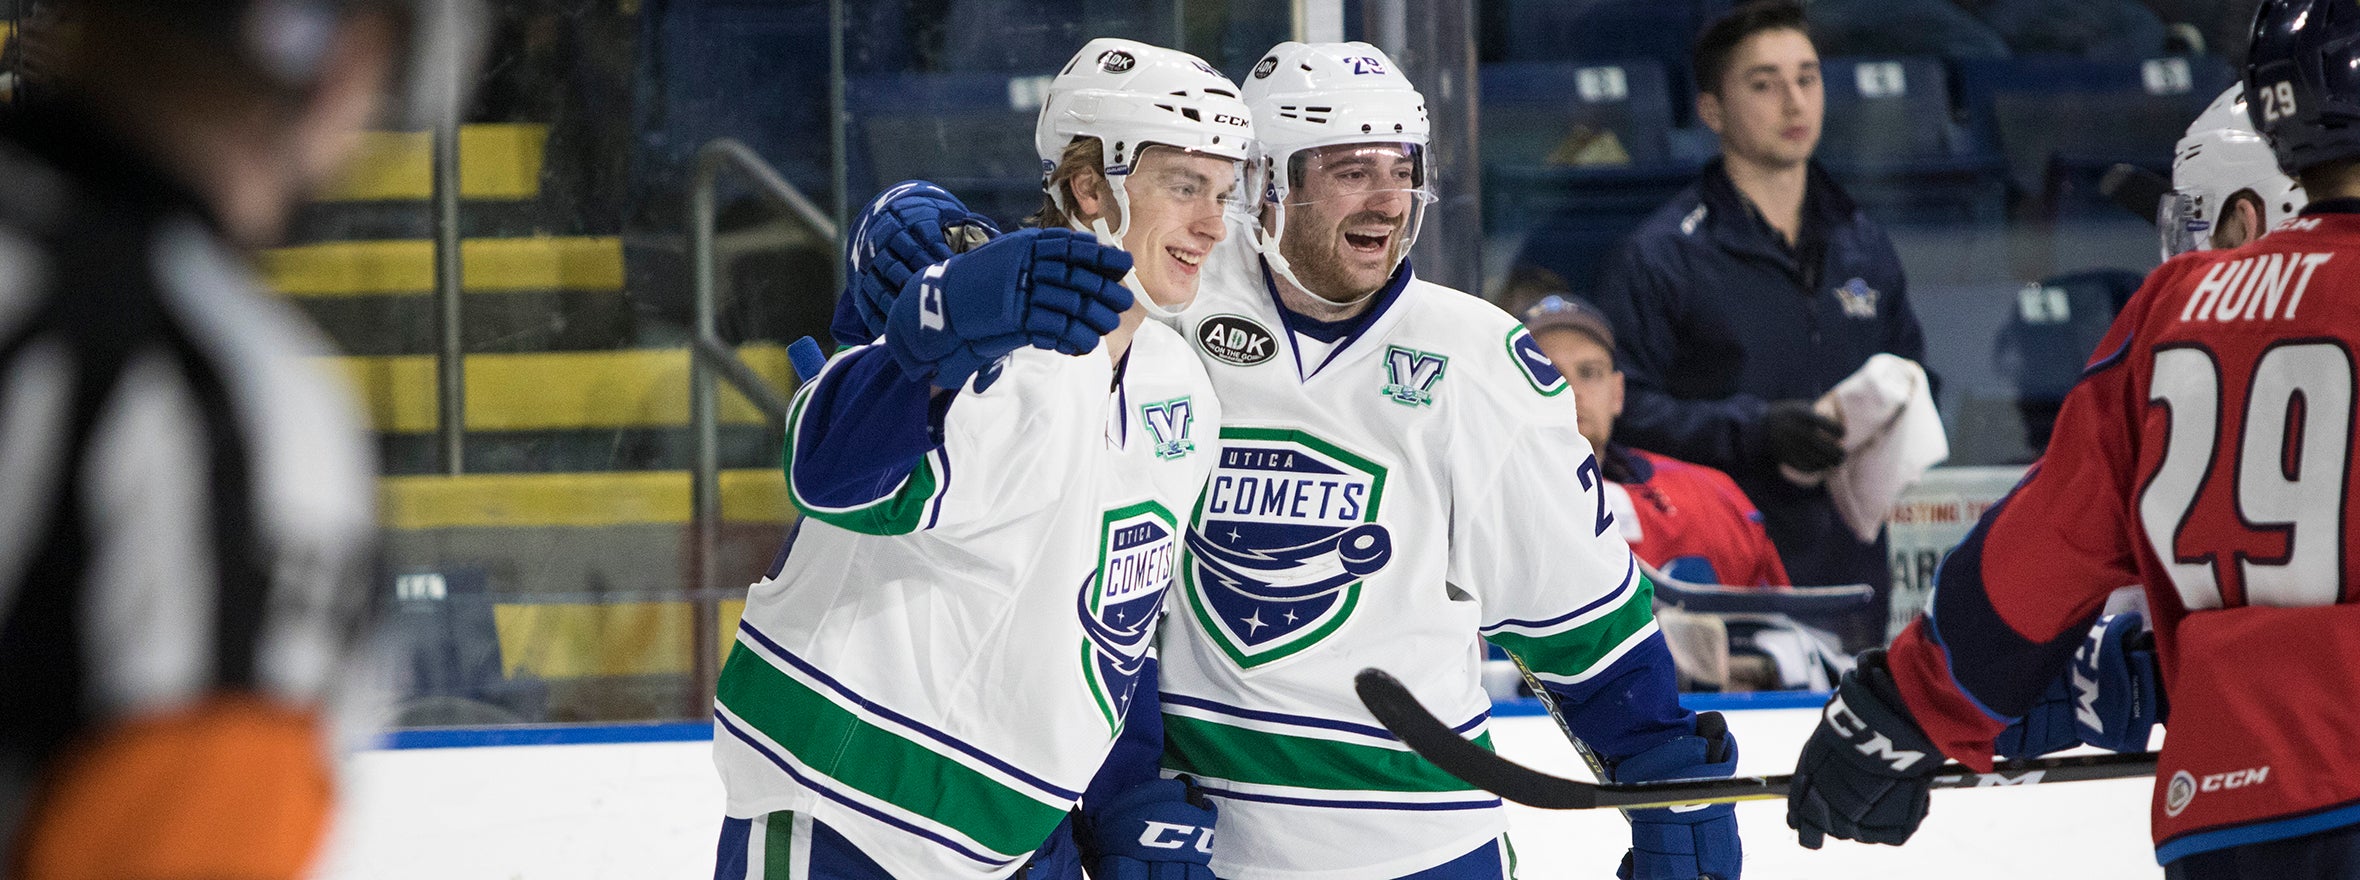 COMETS REIGN OVER THUNDERBIRDS IN A WILD AFFAIR